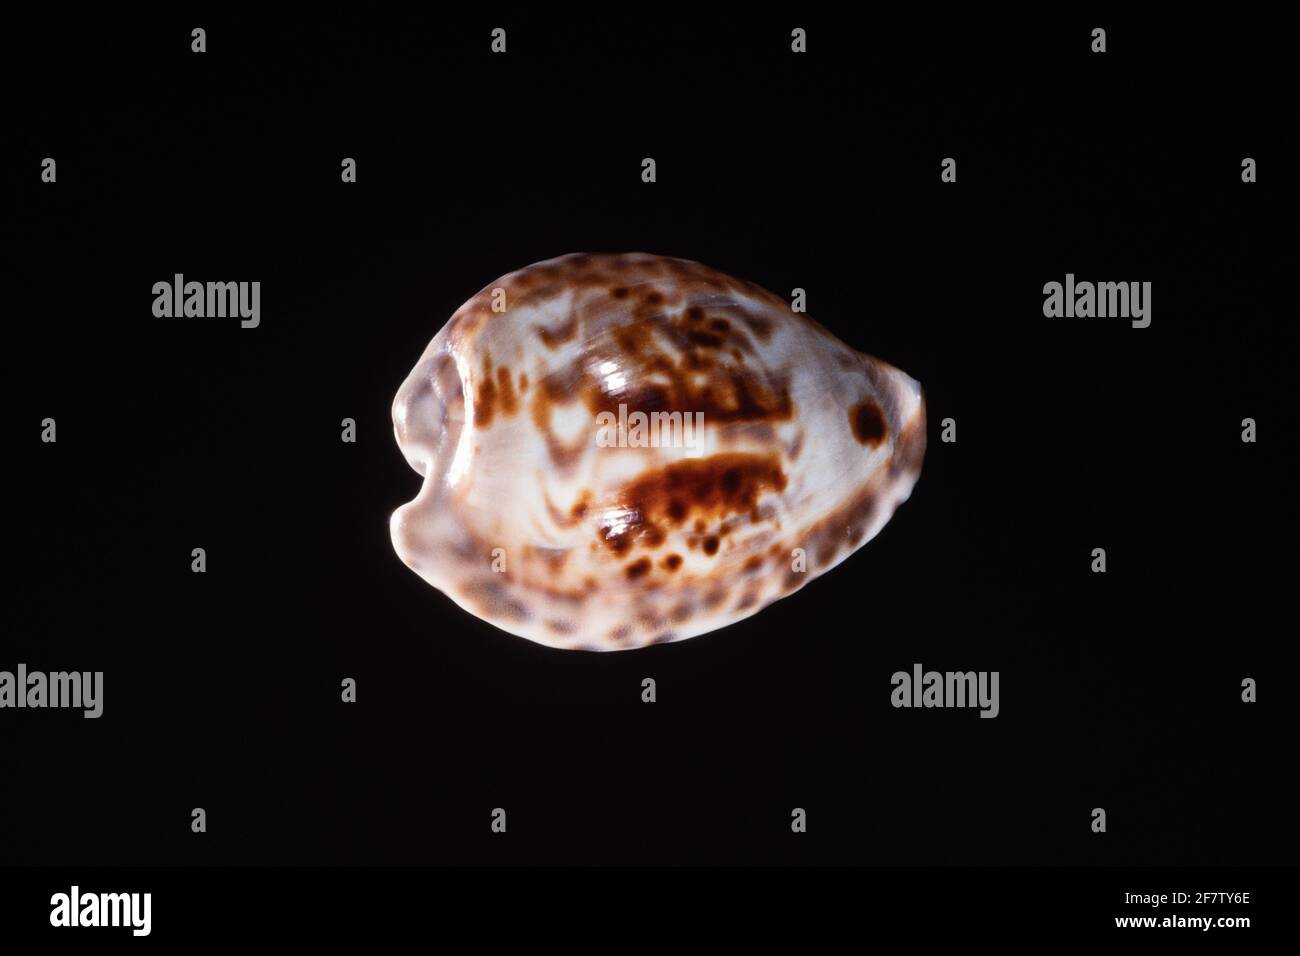 White-mouthed Cowry, Barycypraea teulerei, a sea snail found only in the Arabian Sea off Oman and Masirah Island. Stock Photo